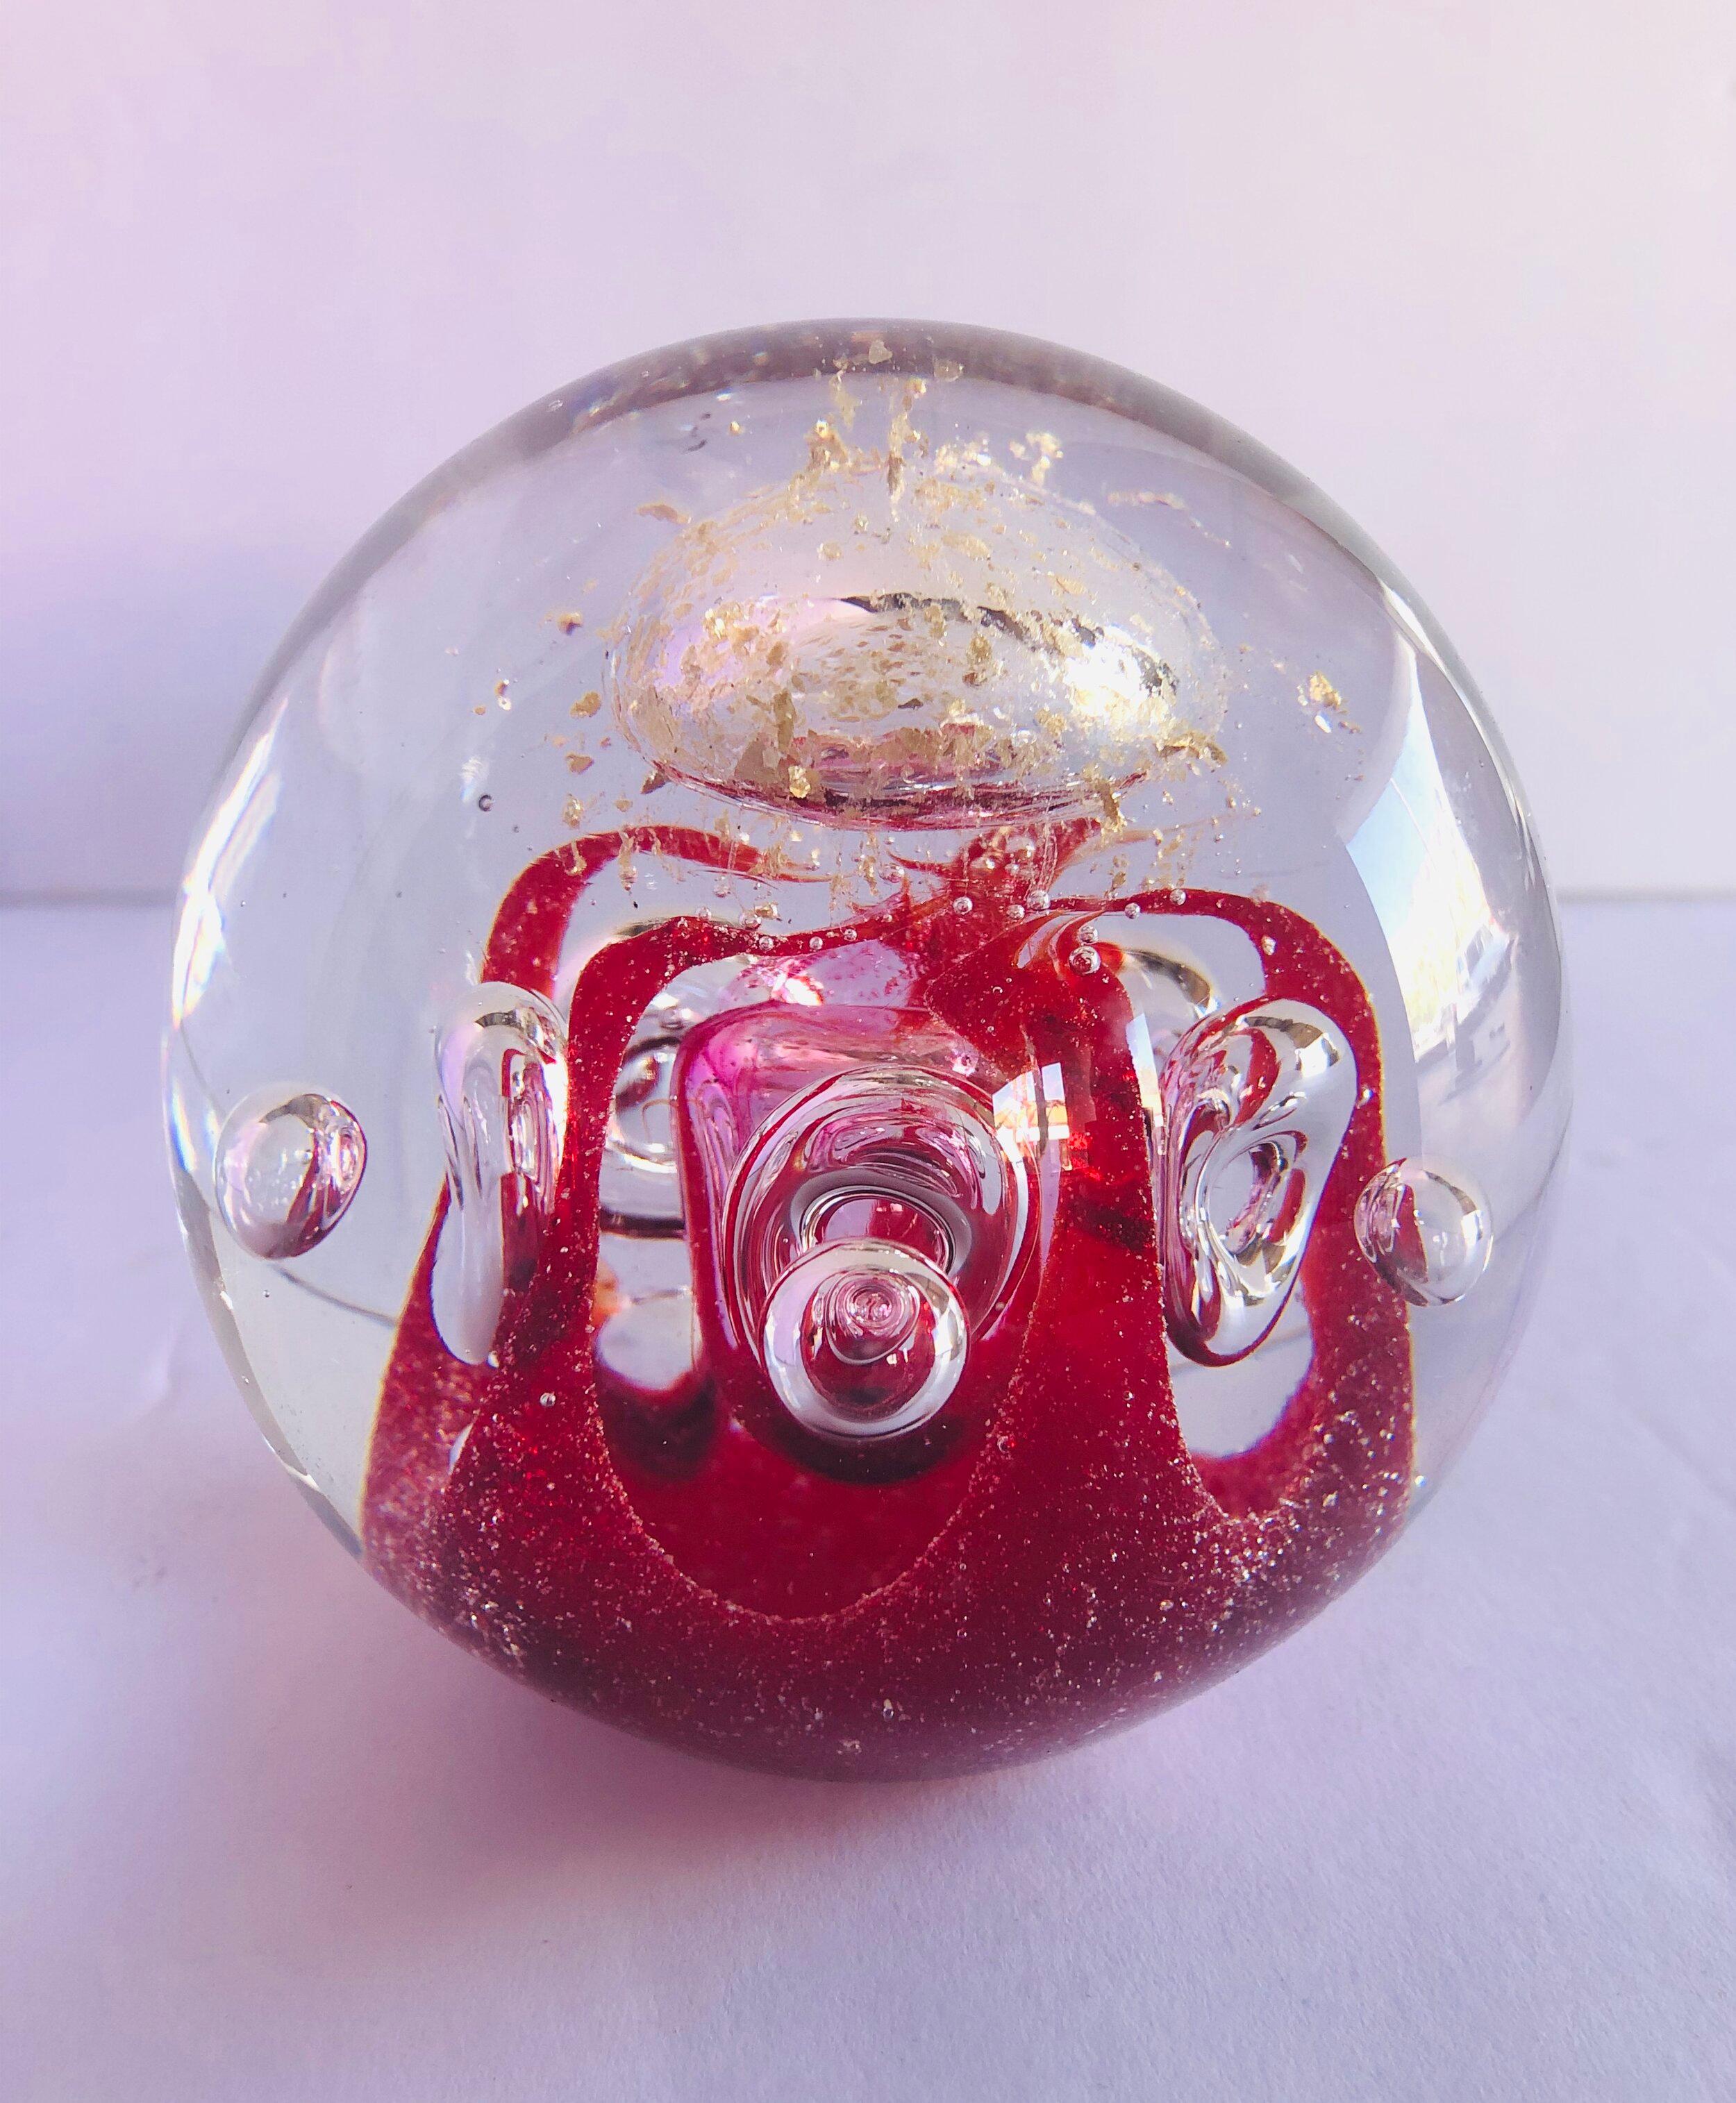 Vintage Italian clear and red Murano glass paperweight with gold fleck infused, made in Italy, circa 1960s
Measures: Diameter 4 inches, height 4 inches
1 in stock in Los Angeles
Order reference #: FABIOLTD G83
This piece makes for a great and unique